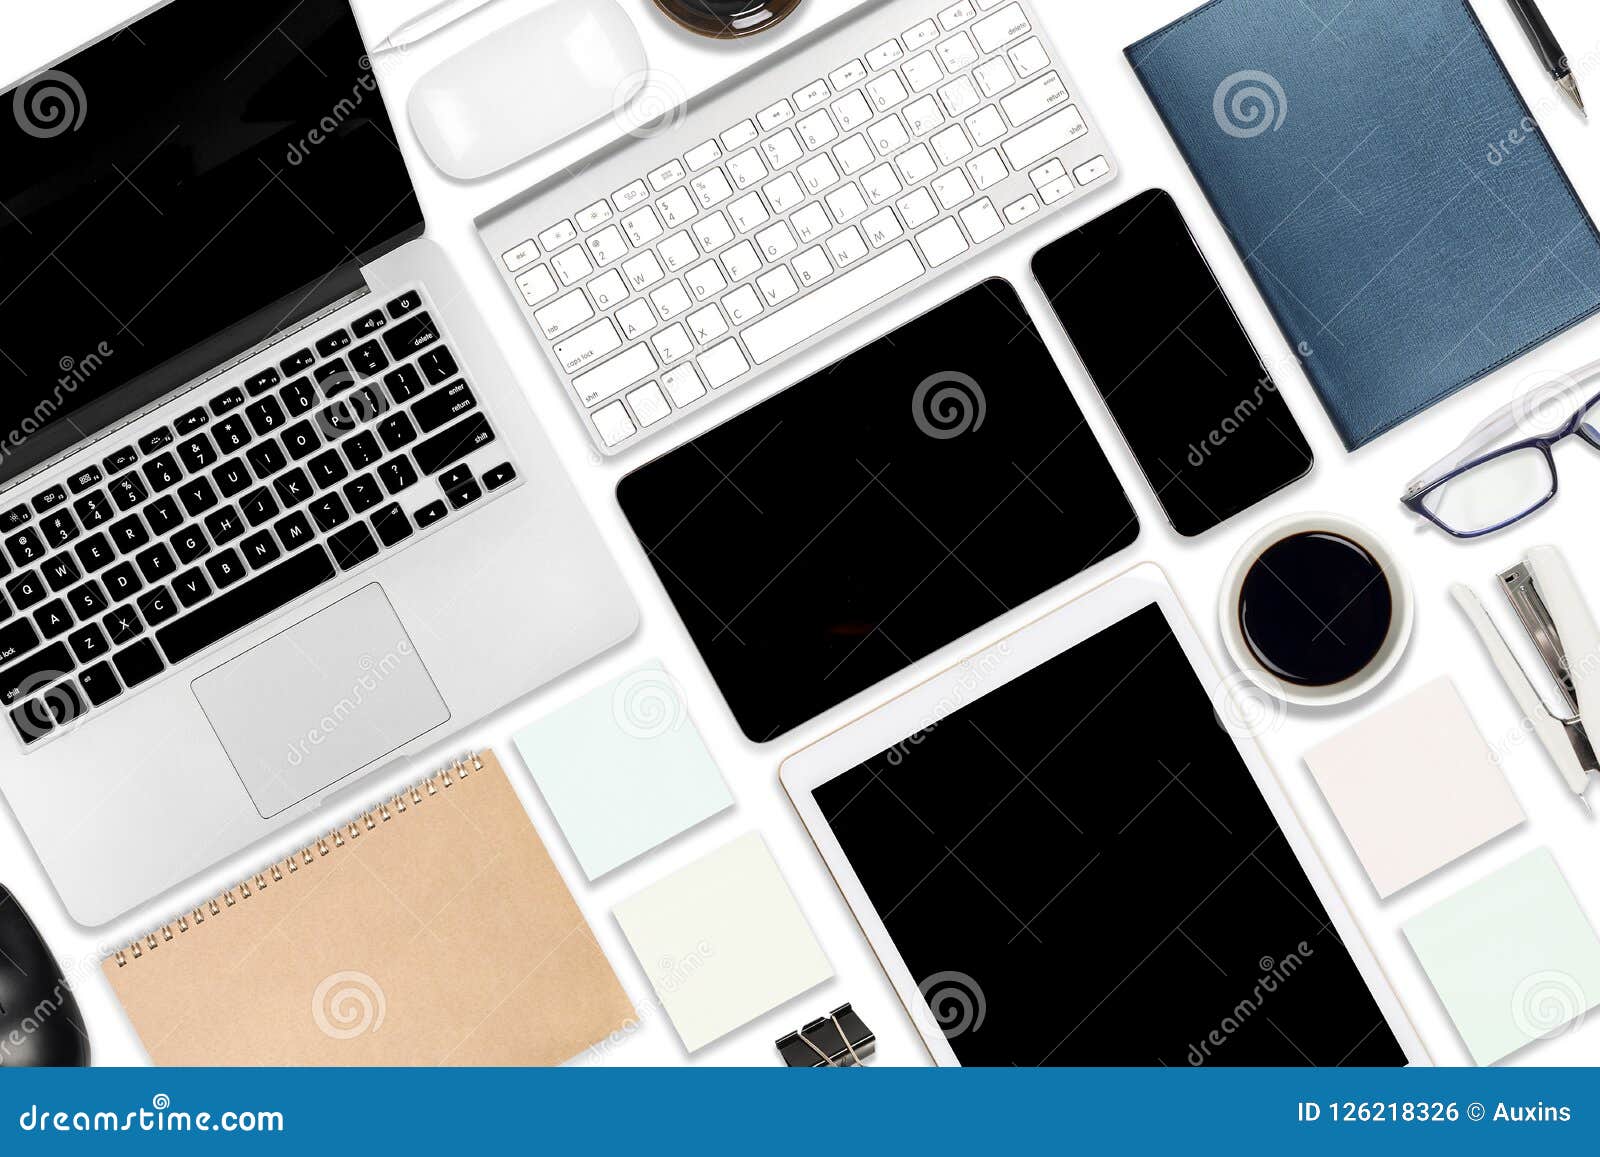 flat lay photo of office table with laptop computer, digital tablet, mobile phone and accessories. on  white background. d